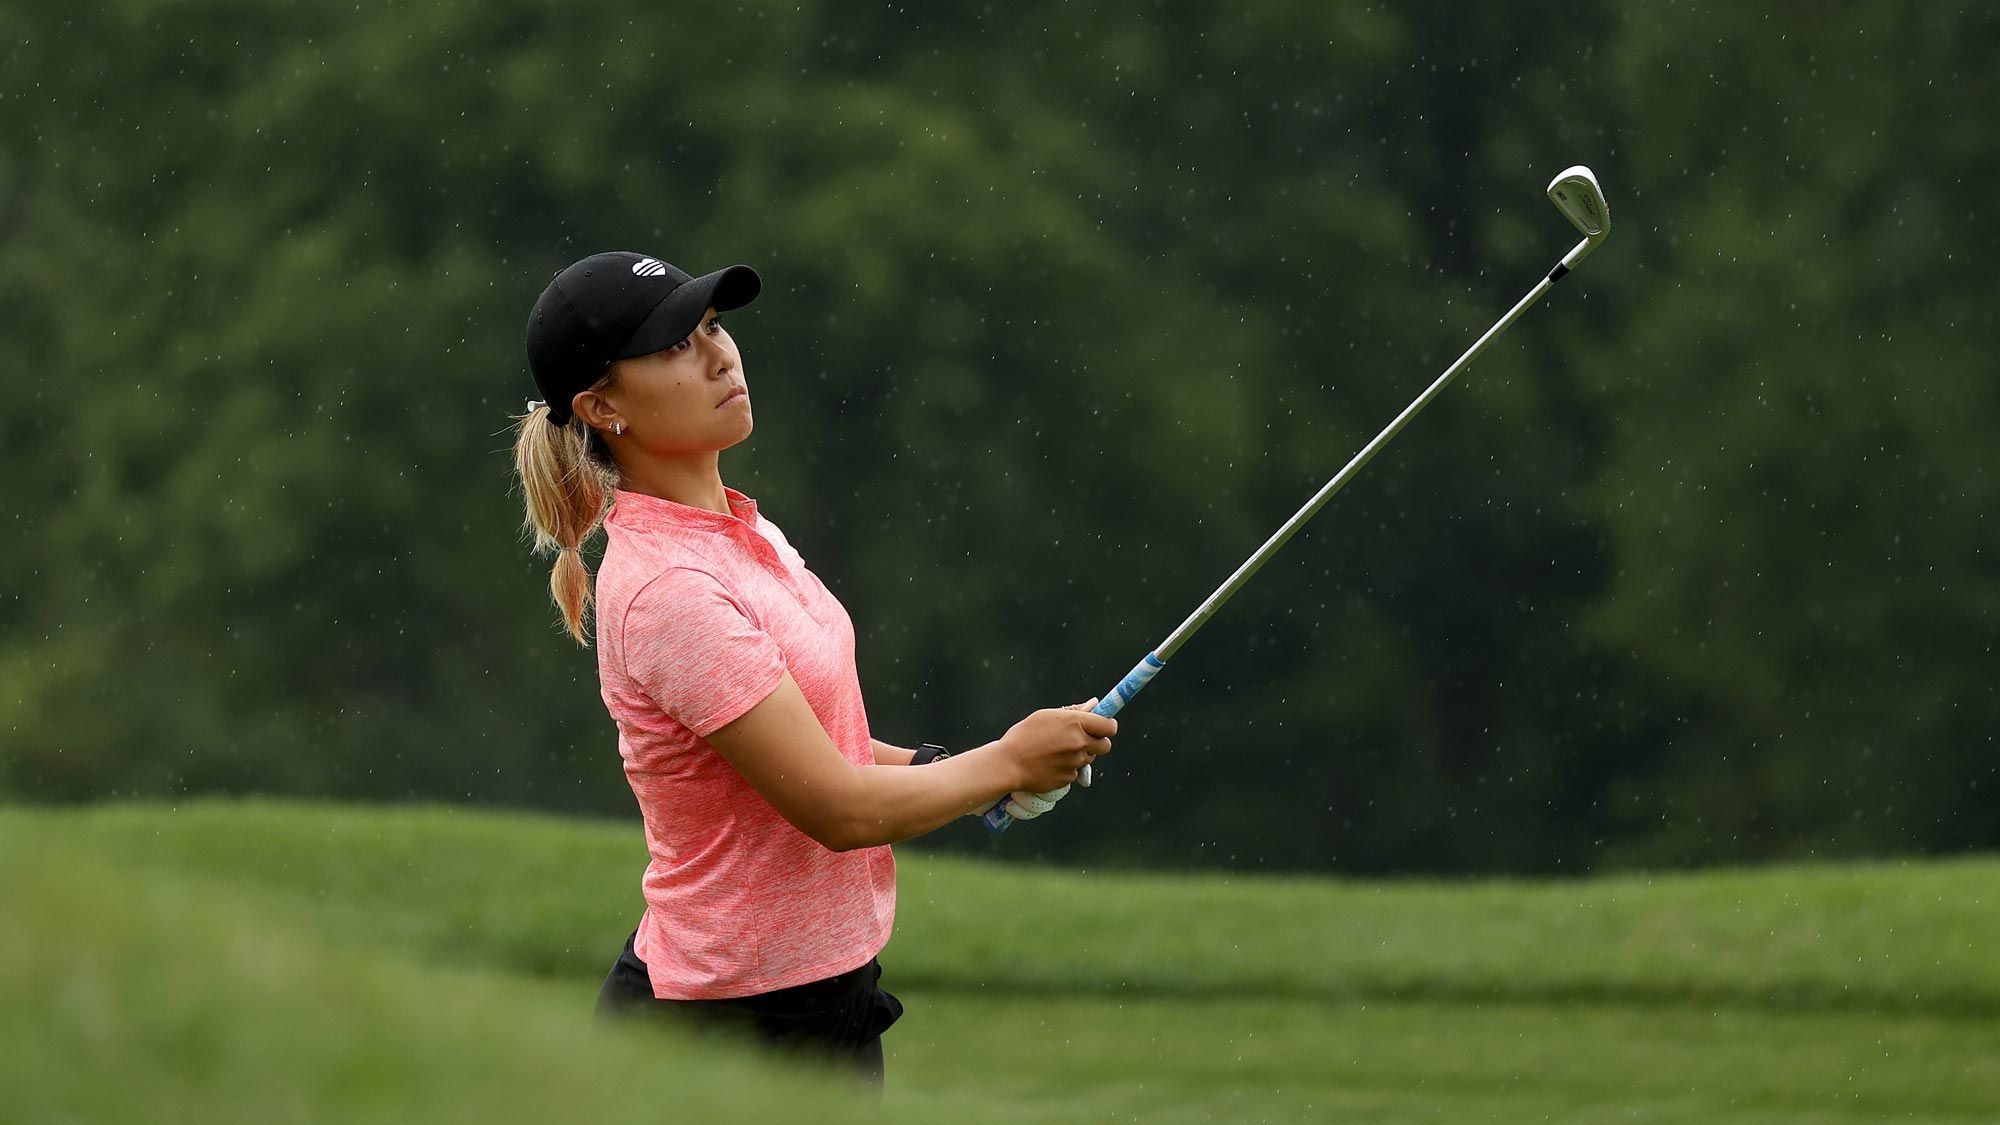 Danielle Kang plays her shot on the sixth hole during the second round of the LPGA Drive On Championship